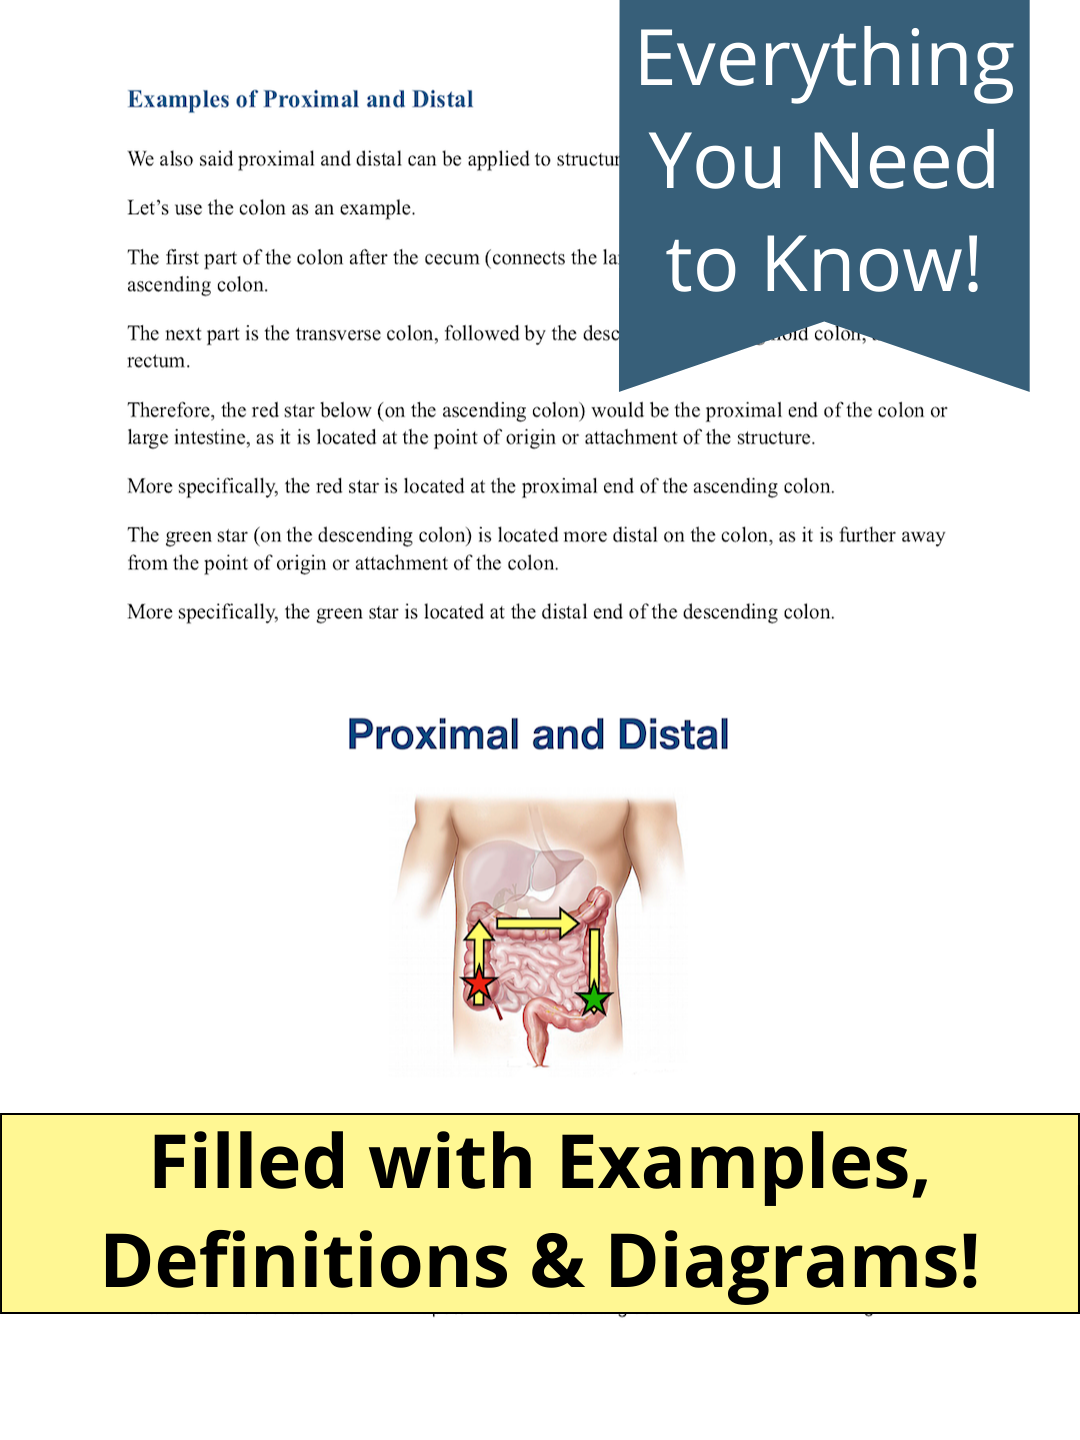 Anatomical Position and Directional Terms [PDF Lecture]